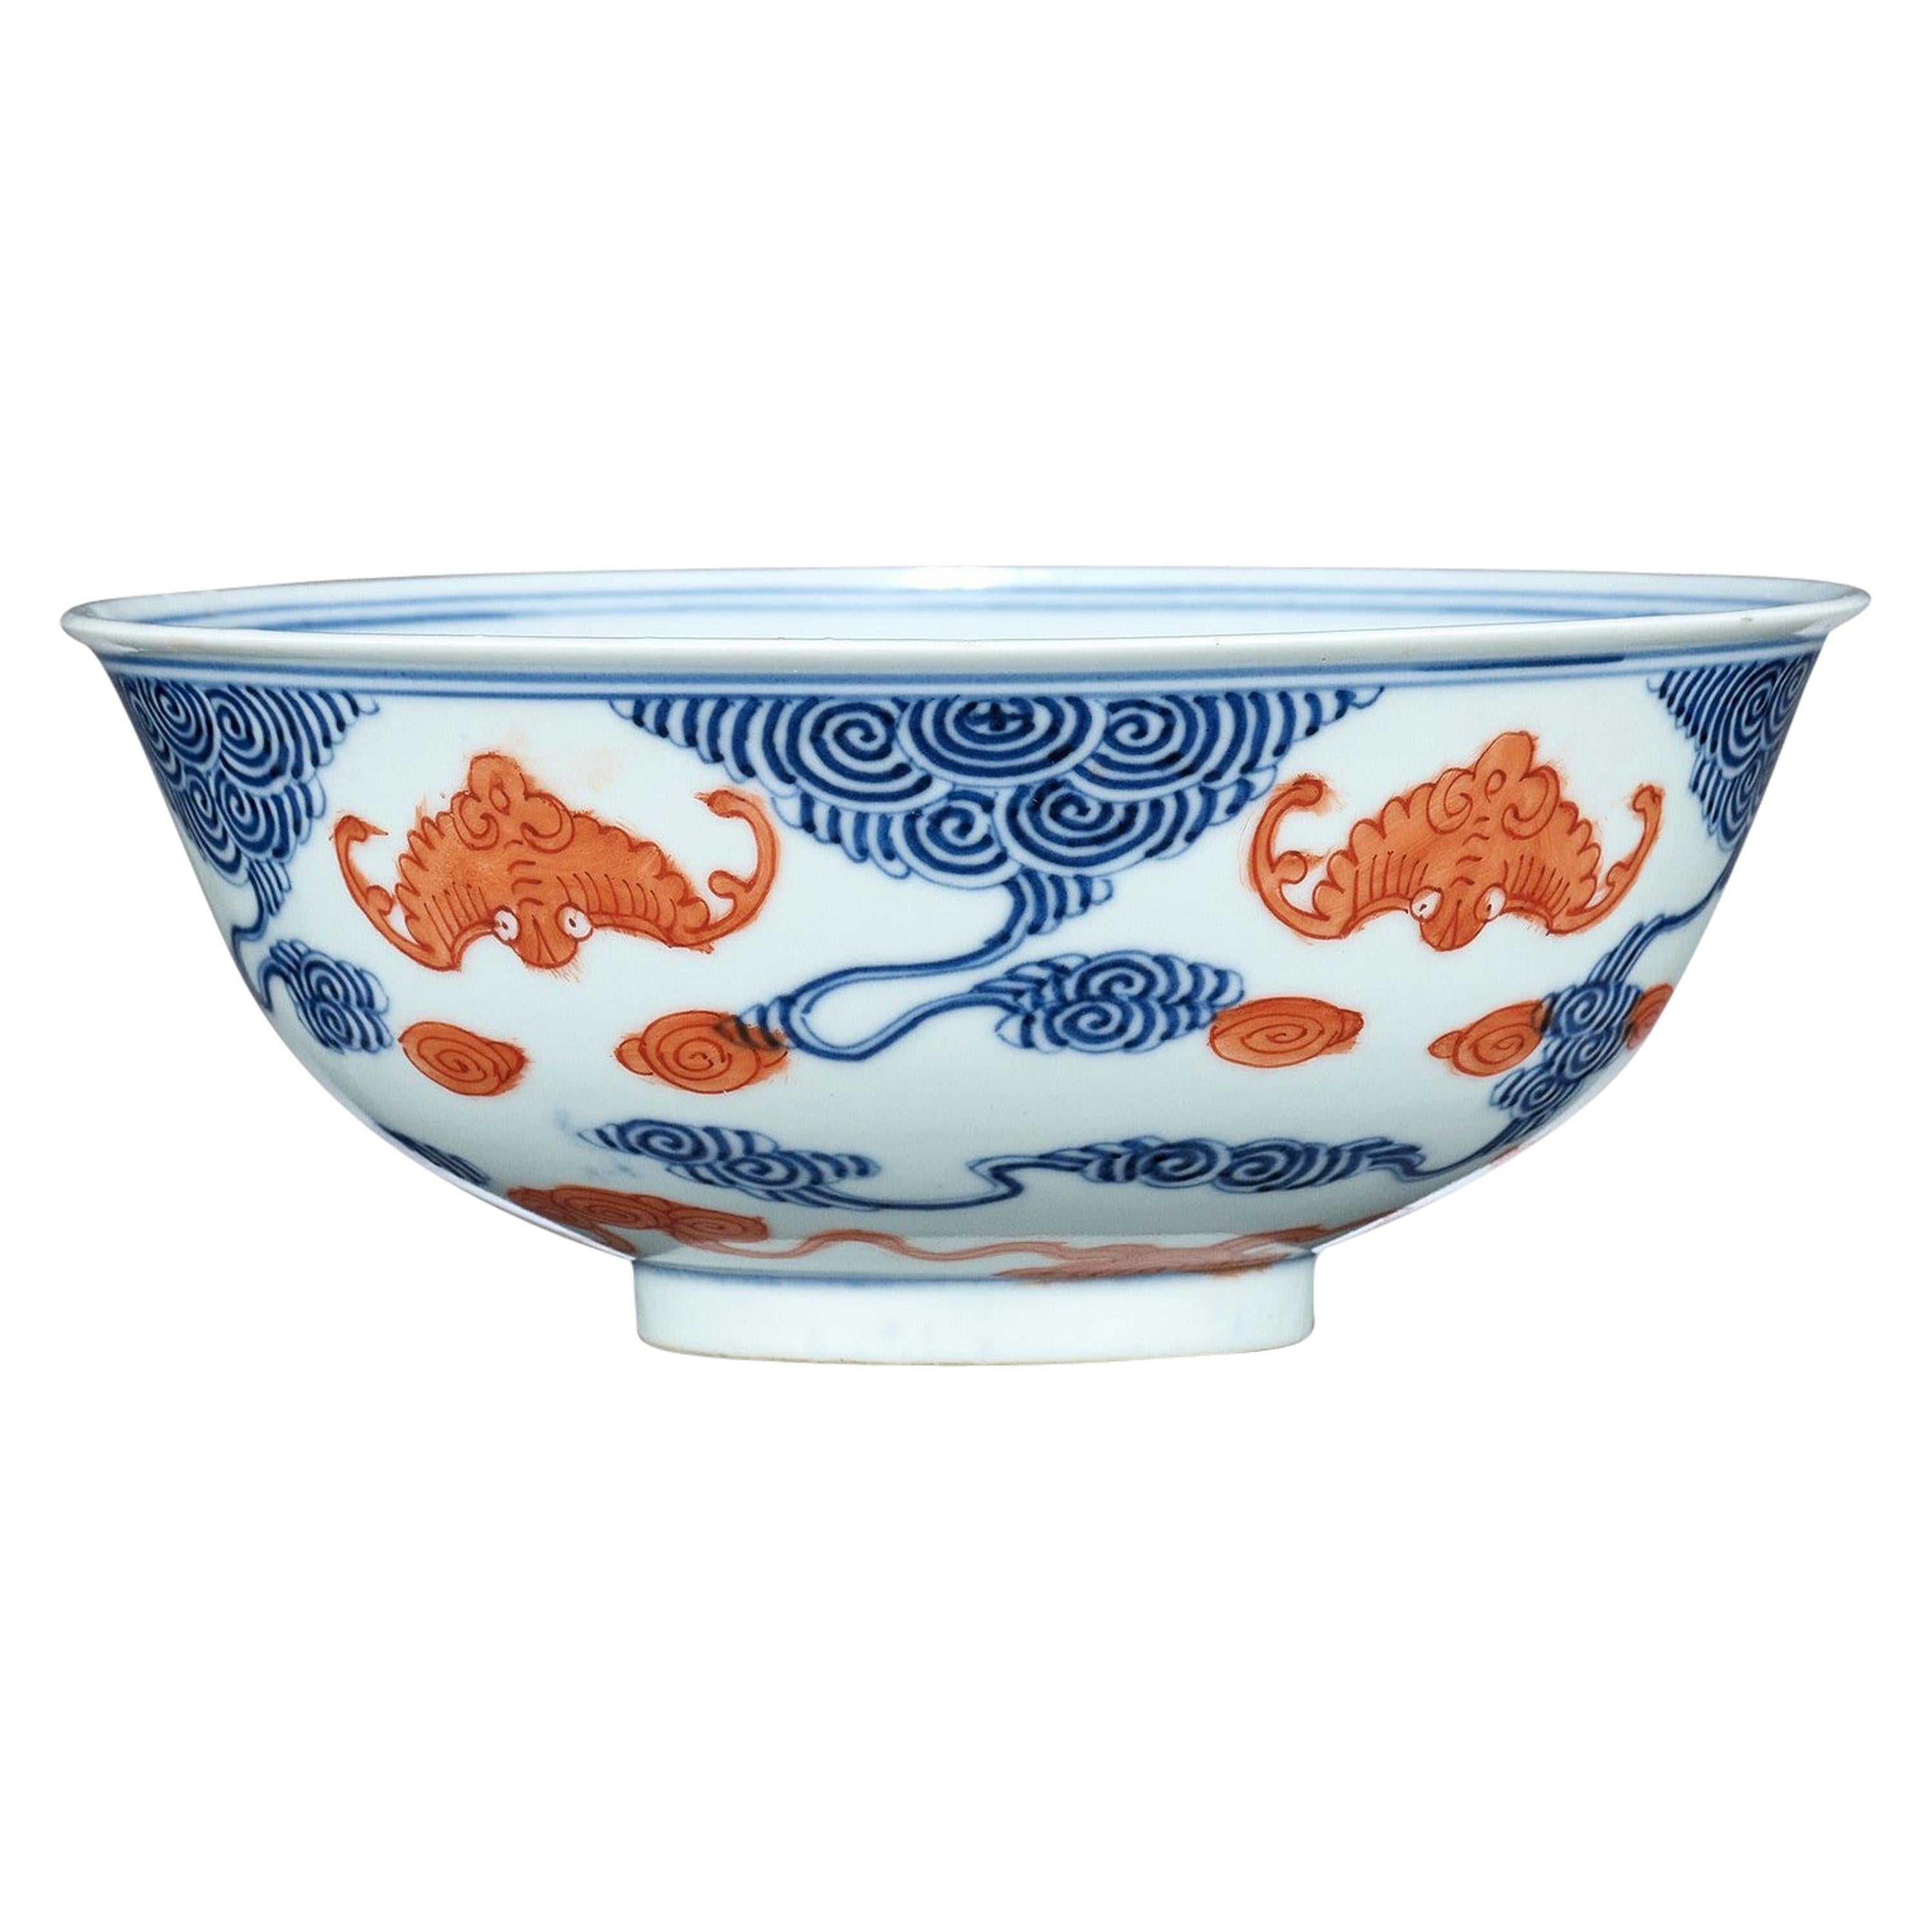 Vintage Japanese Bowl with Birds 1950s Blue and White Character Marked Bowl